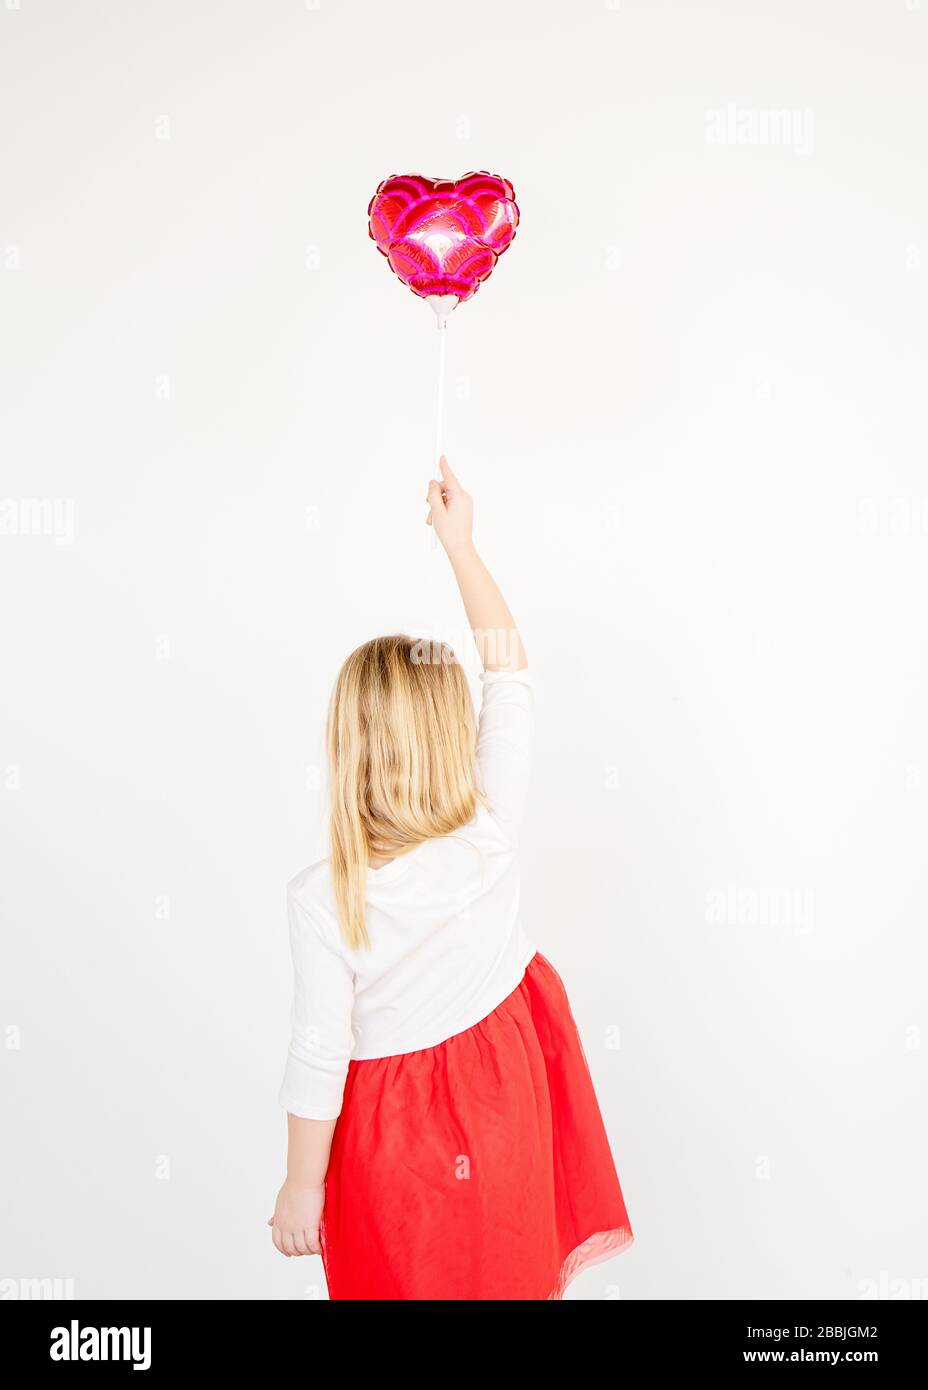 back view little blond girl in red tutu holding red heart balloon Stock Photo